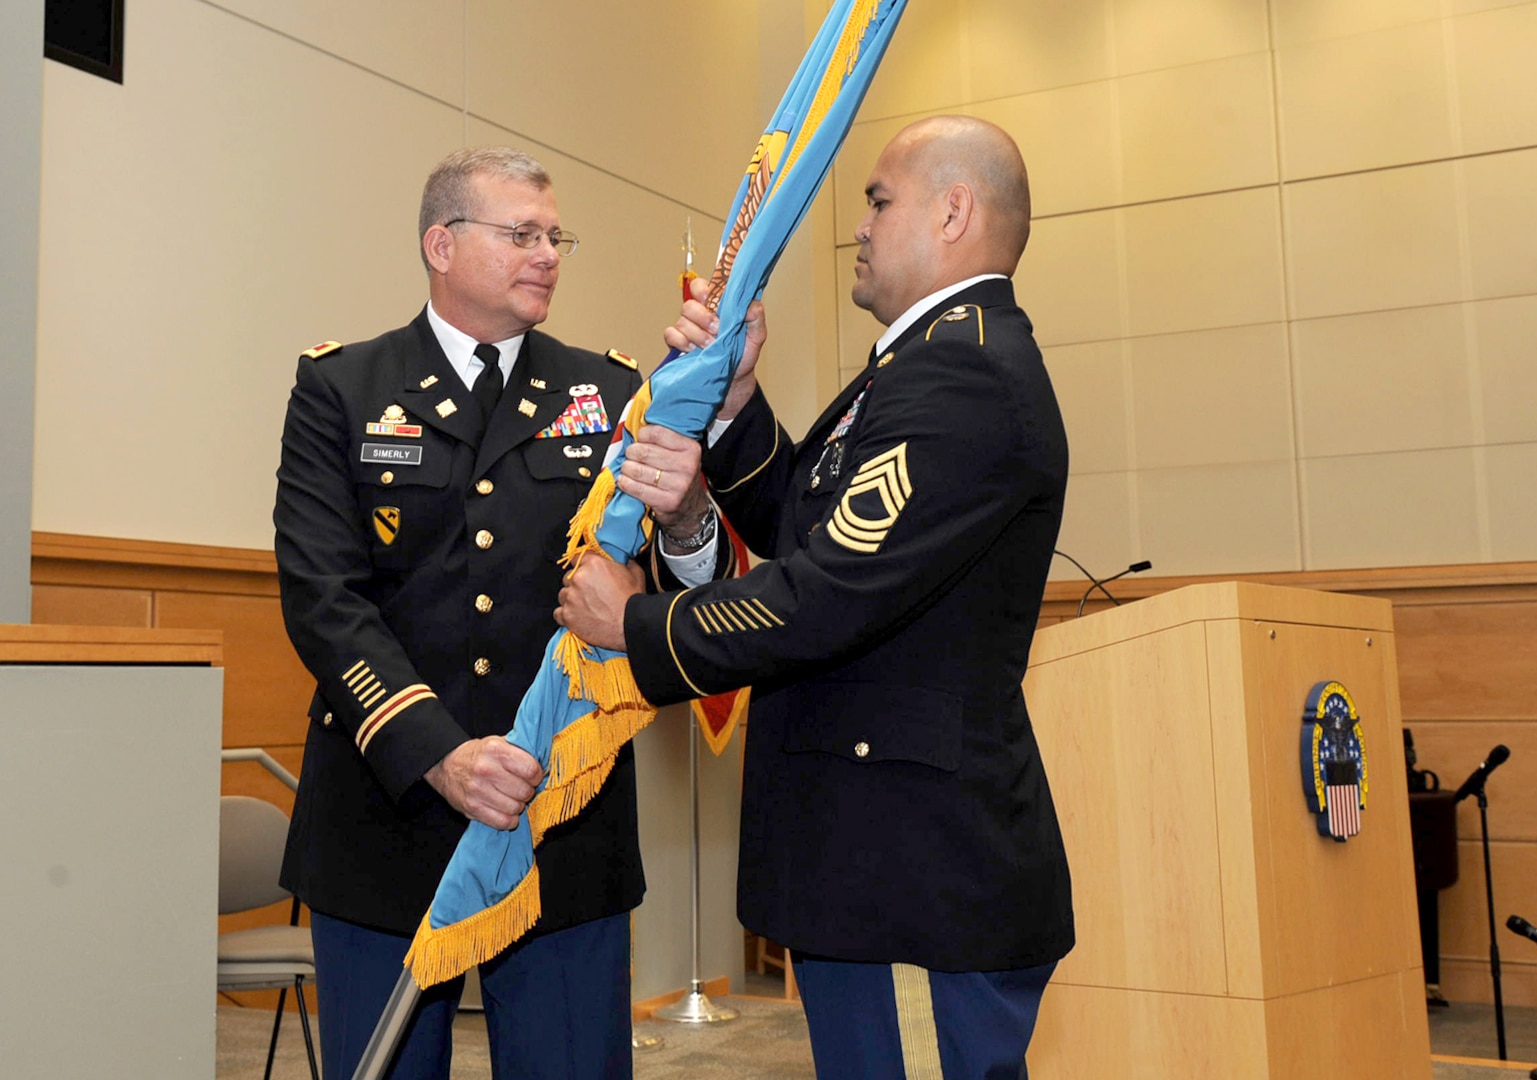 Army Col. Mark Simerly, DLA Troop Support incoming commander, passes the DLA flag to Army Master Sgt. Jose Moraga, DLA Troop Support senior enlisted service member, during a change of command ceremony July 11 in Philadelphia. Simerly was previously the director of capabilities, development and integration with the Combined Arms Support Command at Fort Lee, Virginia. 